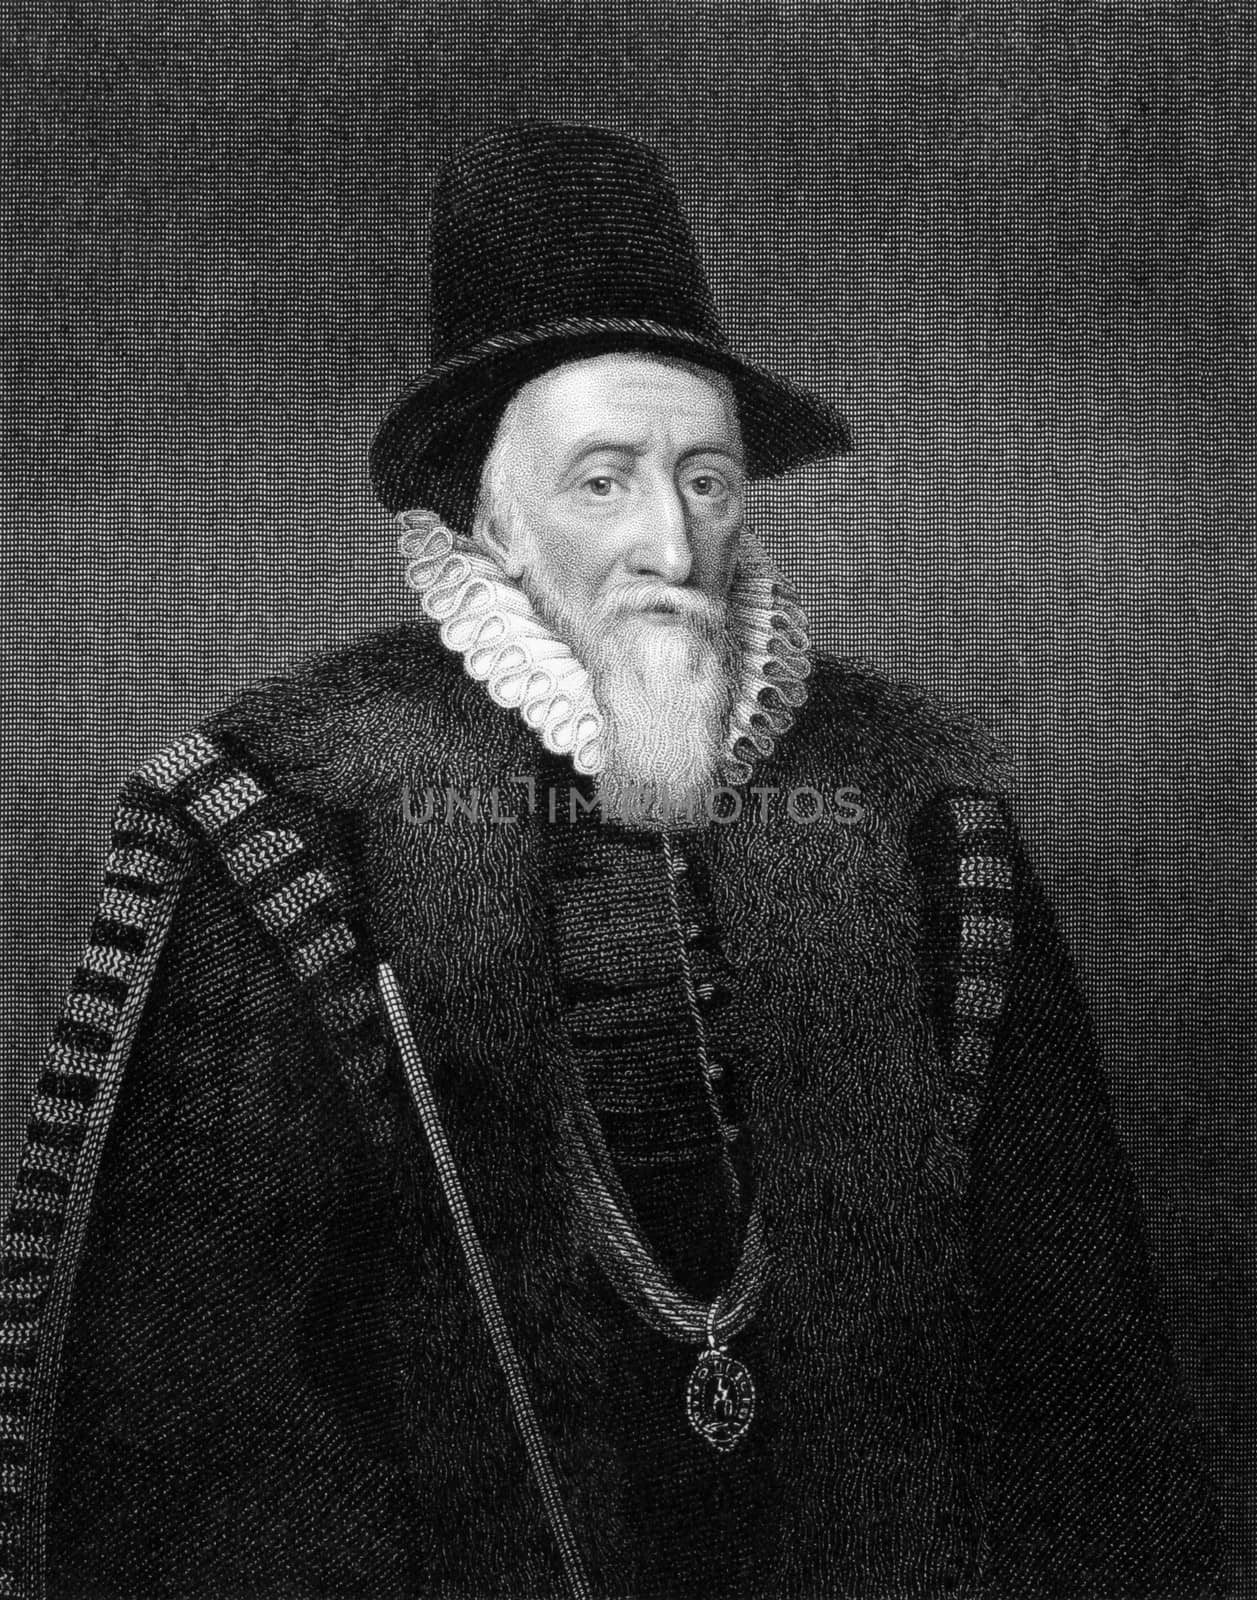 Thomas Sackville, 1st Earl of Dorset (1536-1608) on engraving from 1829. English statesman, poet, and dramatist. Engraved by T.Wright and published in ''Portraits of Illustrious Personages of Great Britain'',UK,1829.